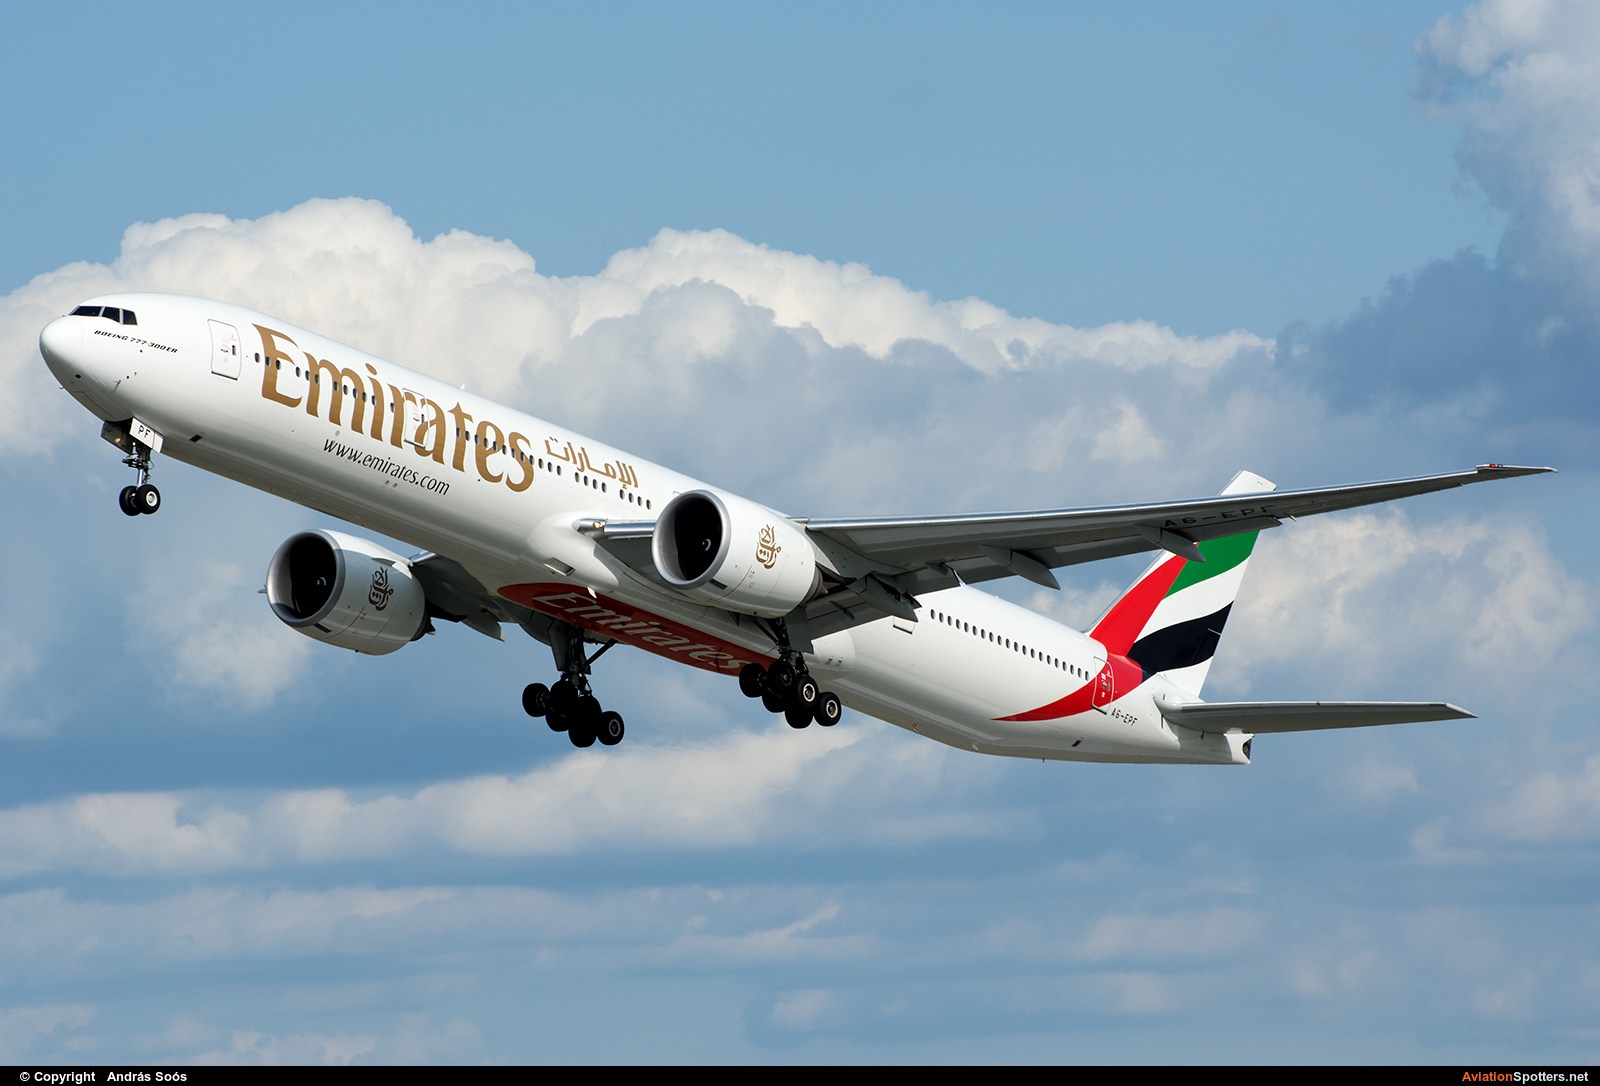 Emirates Airlines  -  777-300ER  (A6-EPF) By András Soós (sas1965)